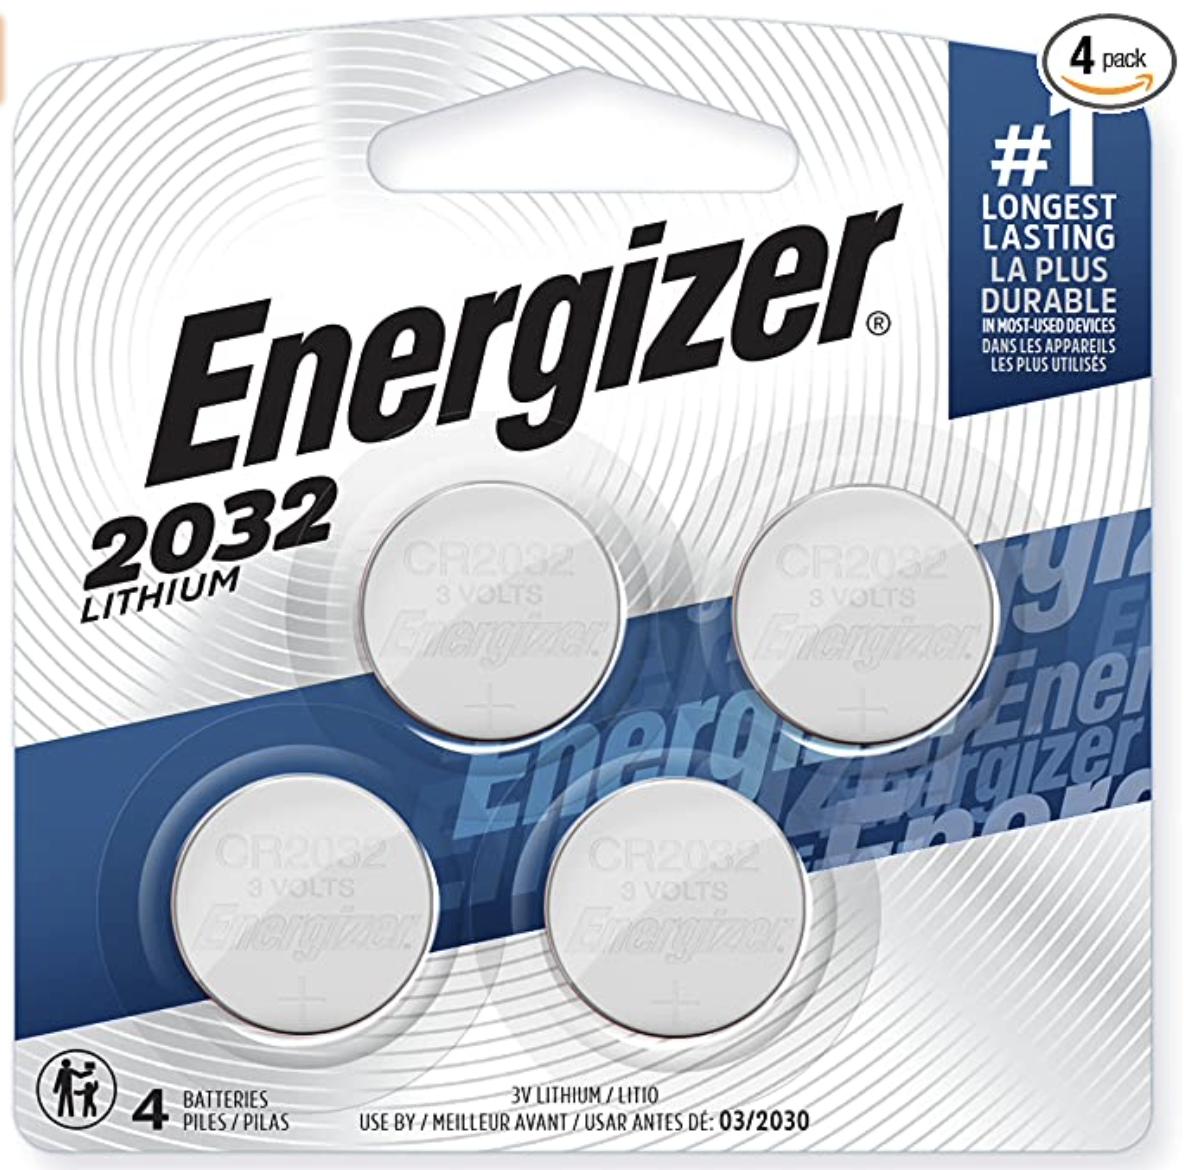 Energizer 2032 Batteries Lithium Cr2032 Watch Battery Four Pack Render Cropped